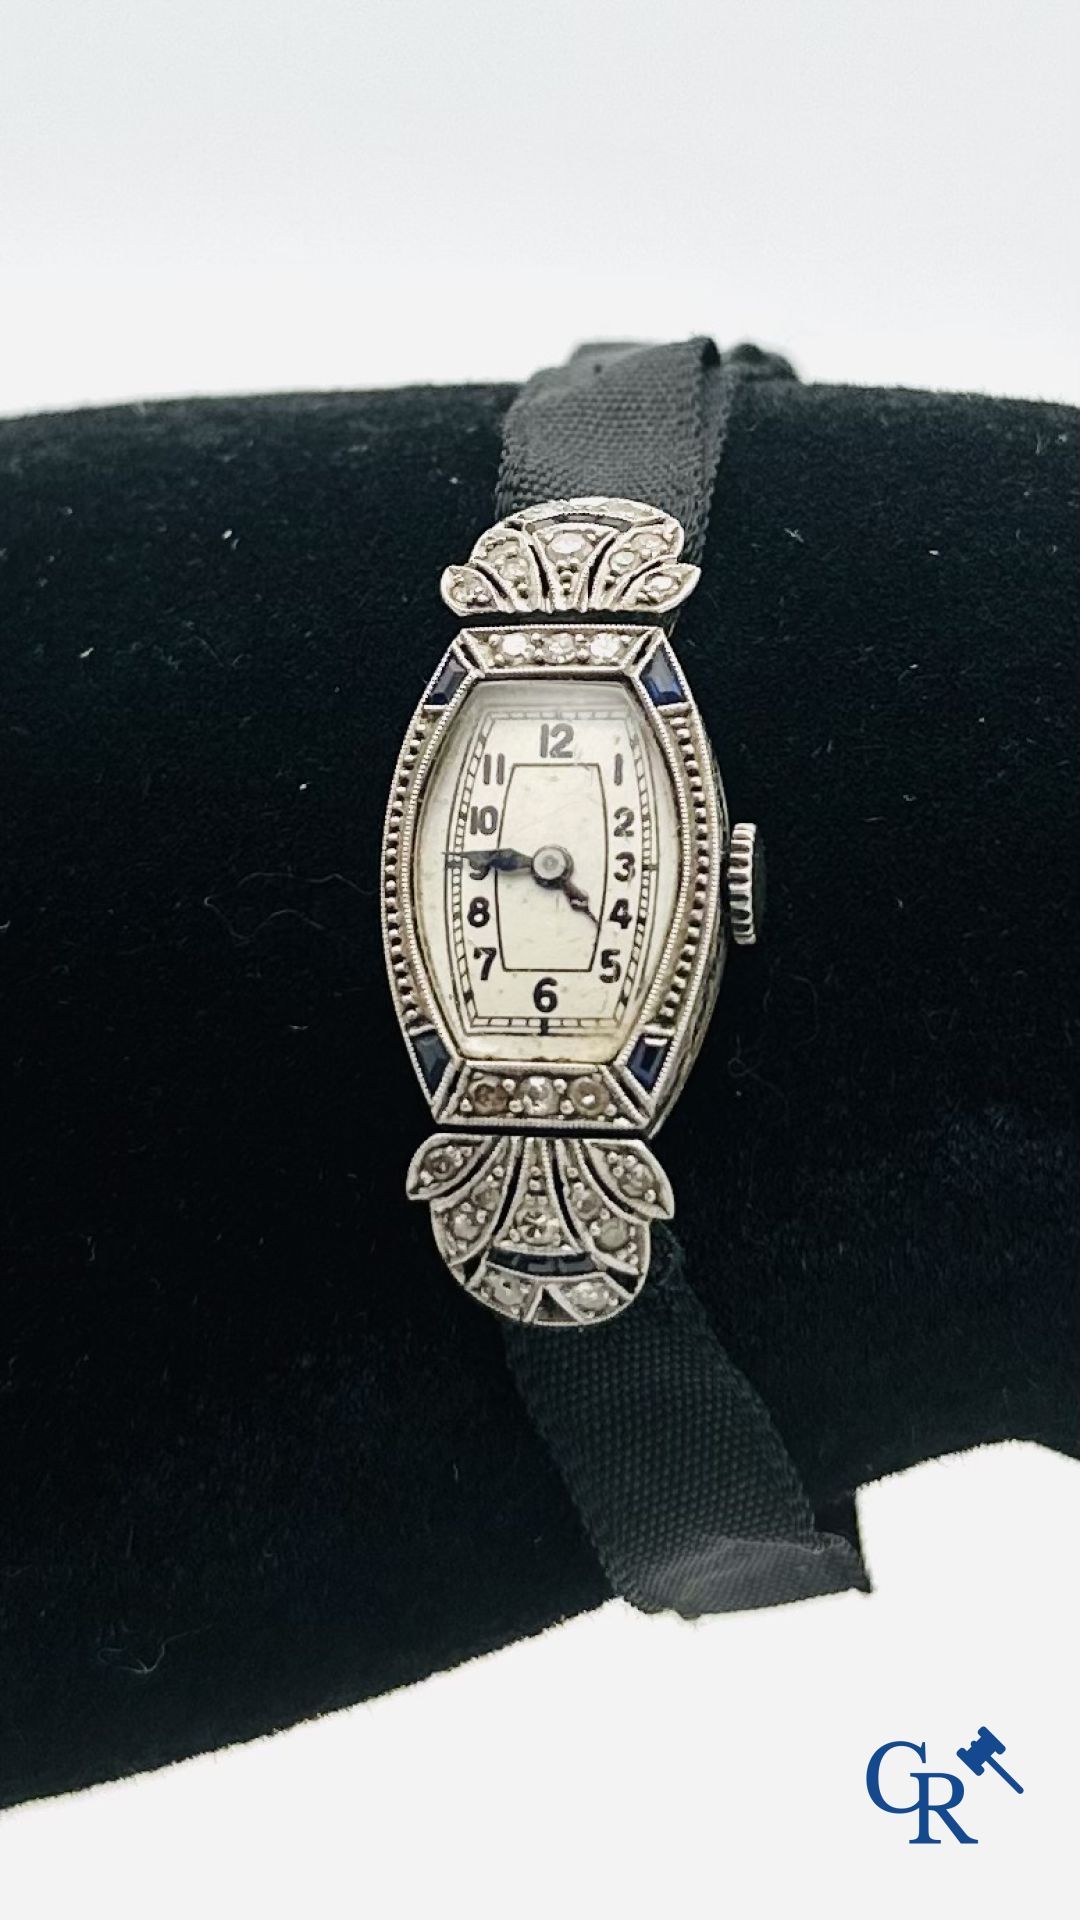 Jewellery: Art deco ladies watch in Platinum set with sapphire and diamonds. (working condition)